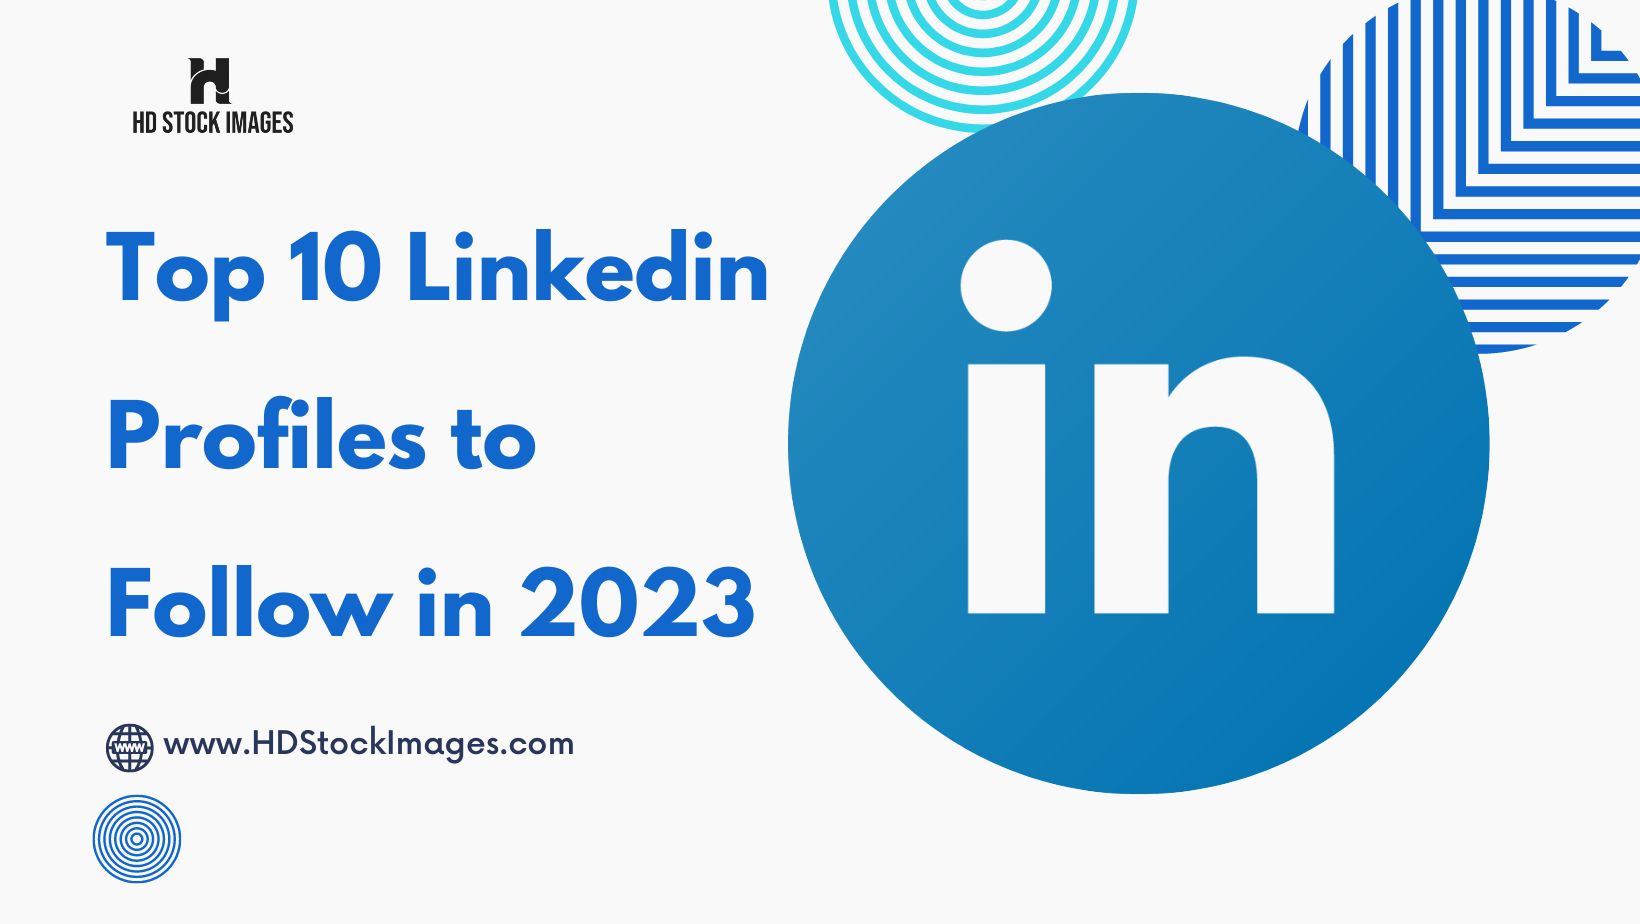 An image of Top 10 Linkedin Profiles to Follow in 2023